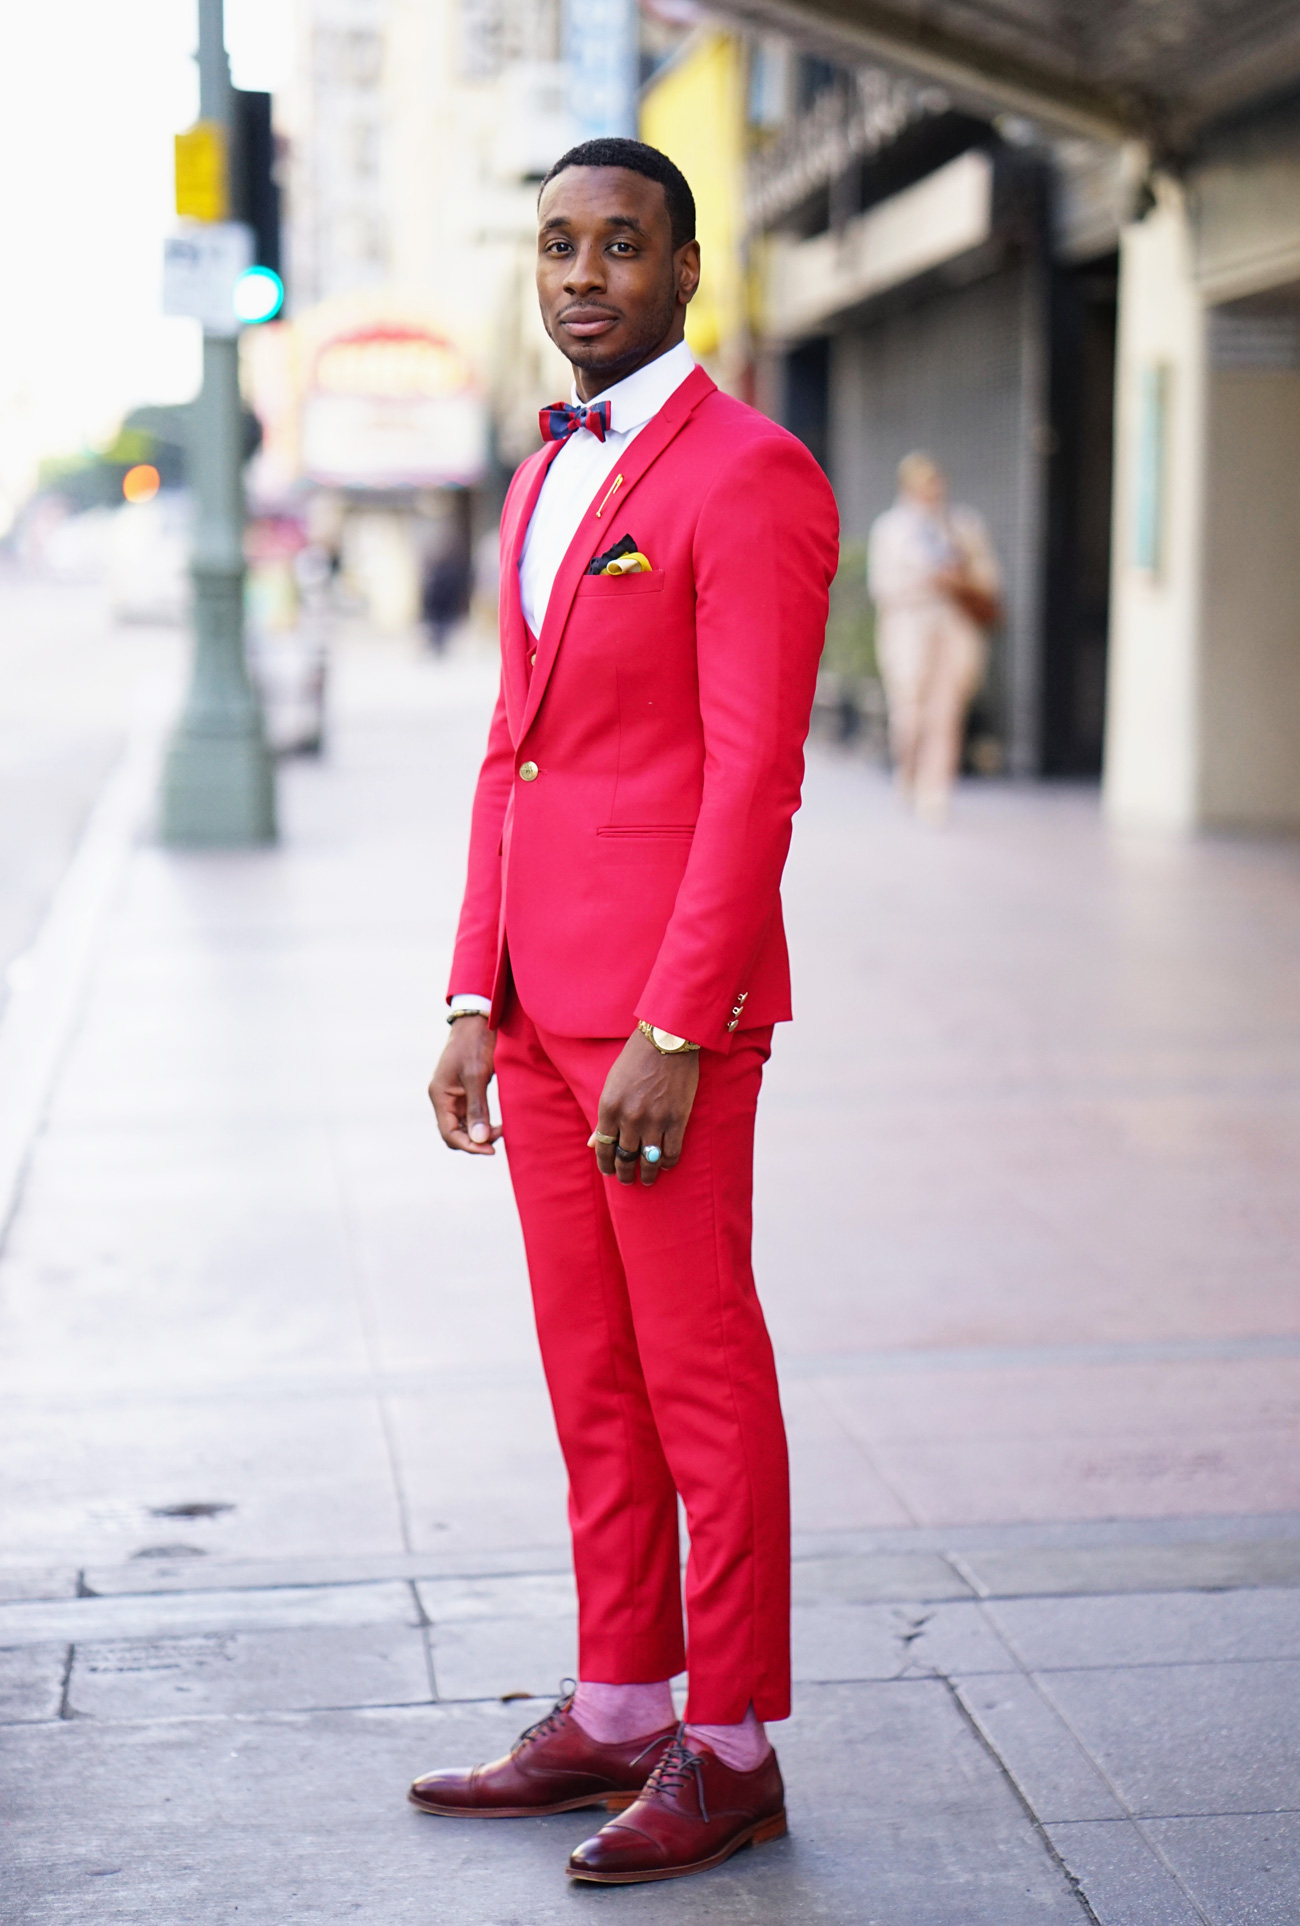 OOTD: RED 3 PIECE SUIT IN BUSINESS ATTIRE – Norris Danta Ford